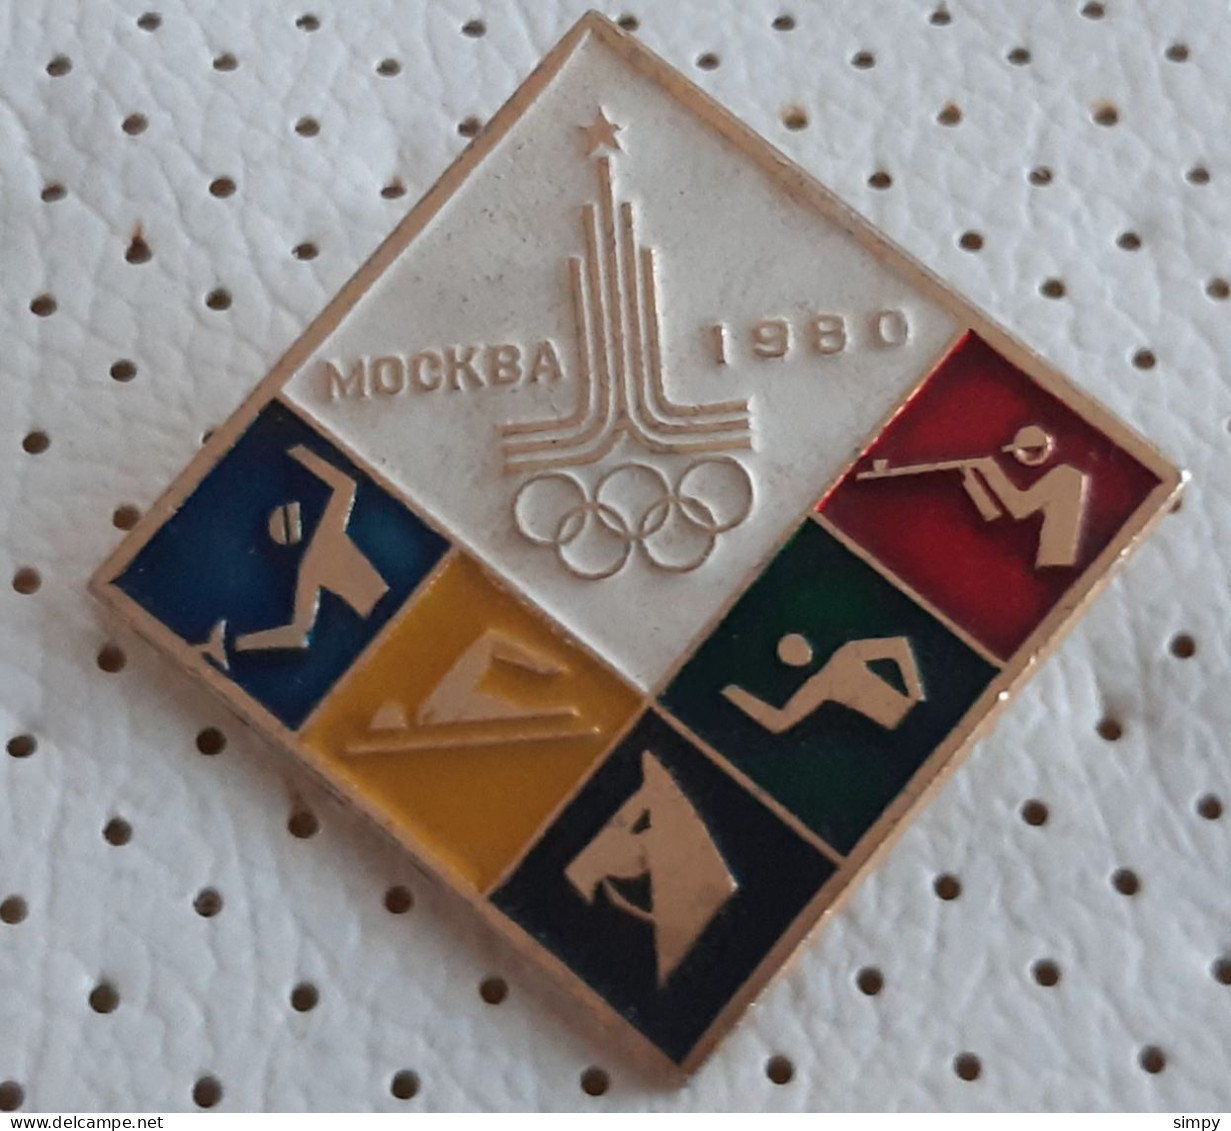 Fencing Swiming Shooting Equitation Olympic Games Moscow 1980 Pin - Weightlifting